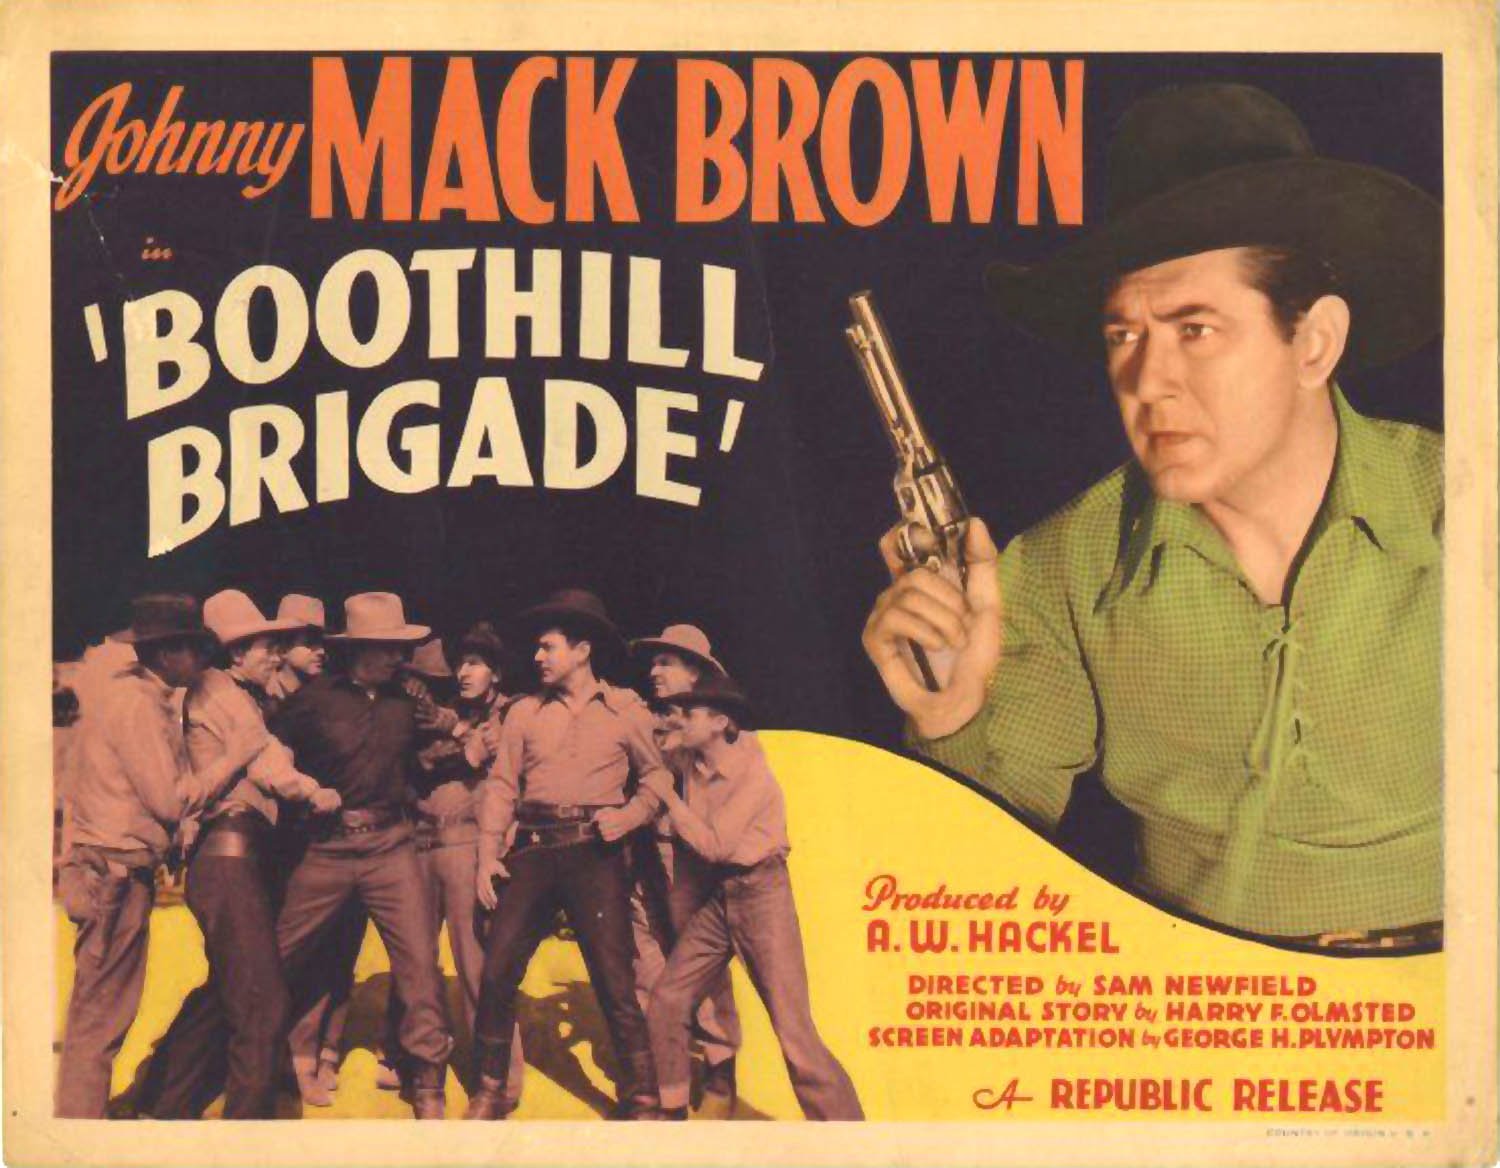 BOOTHILL BRIGADE